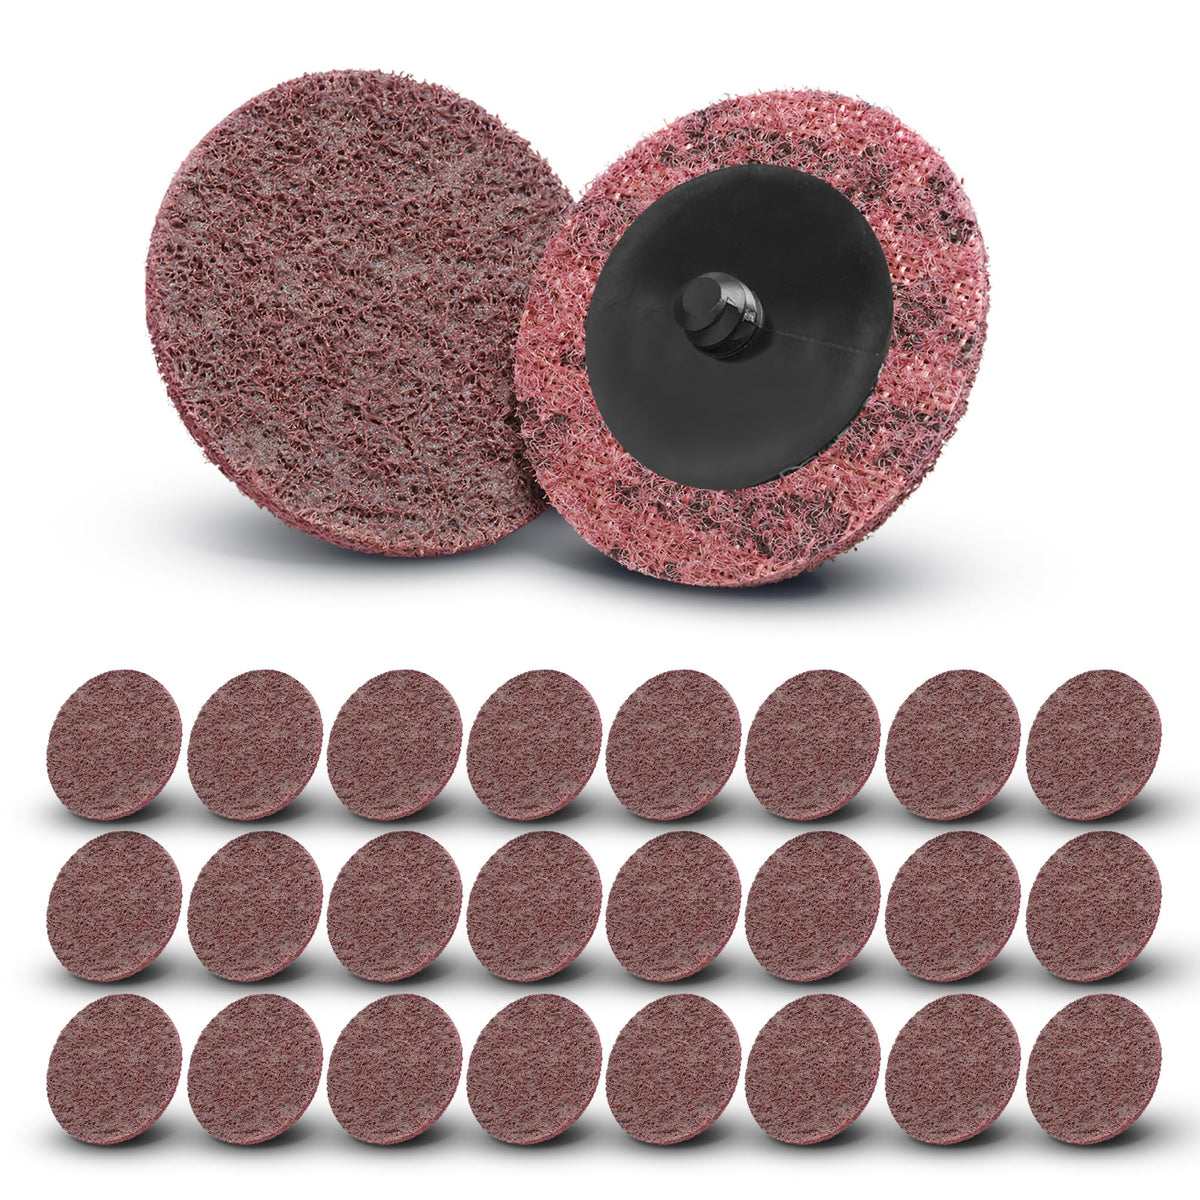 Roloc Disc Sanding Surface Conditioning Disc SC-DR, Type "R" | Package of 25 3 inch Grinding Disks Rust Remover for Metal| Compare to 3M Sanding Discs or Scotch Brite Sanding Sponge by T1A